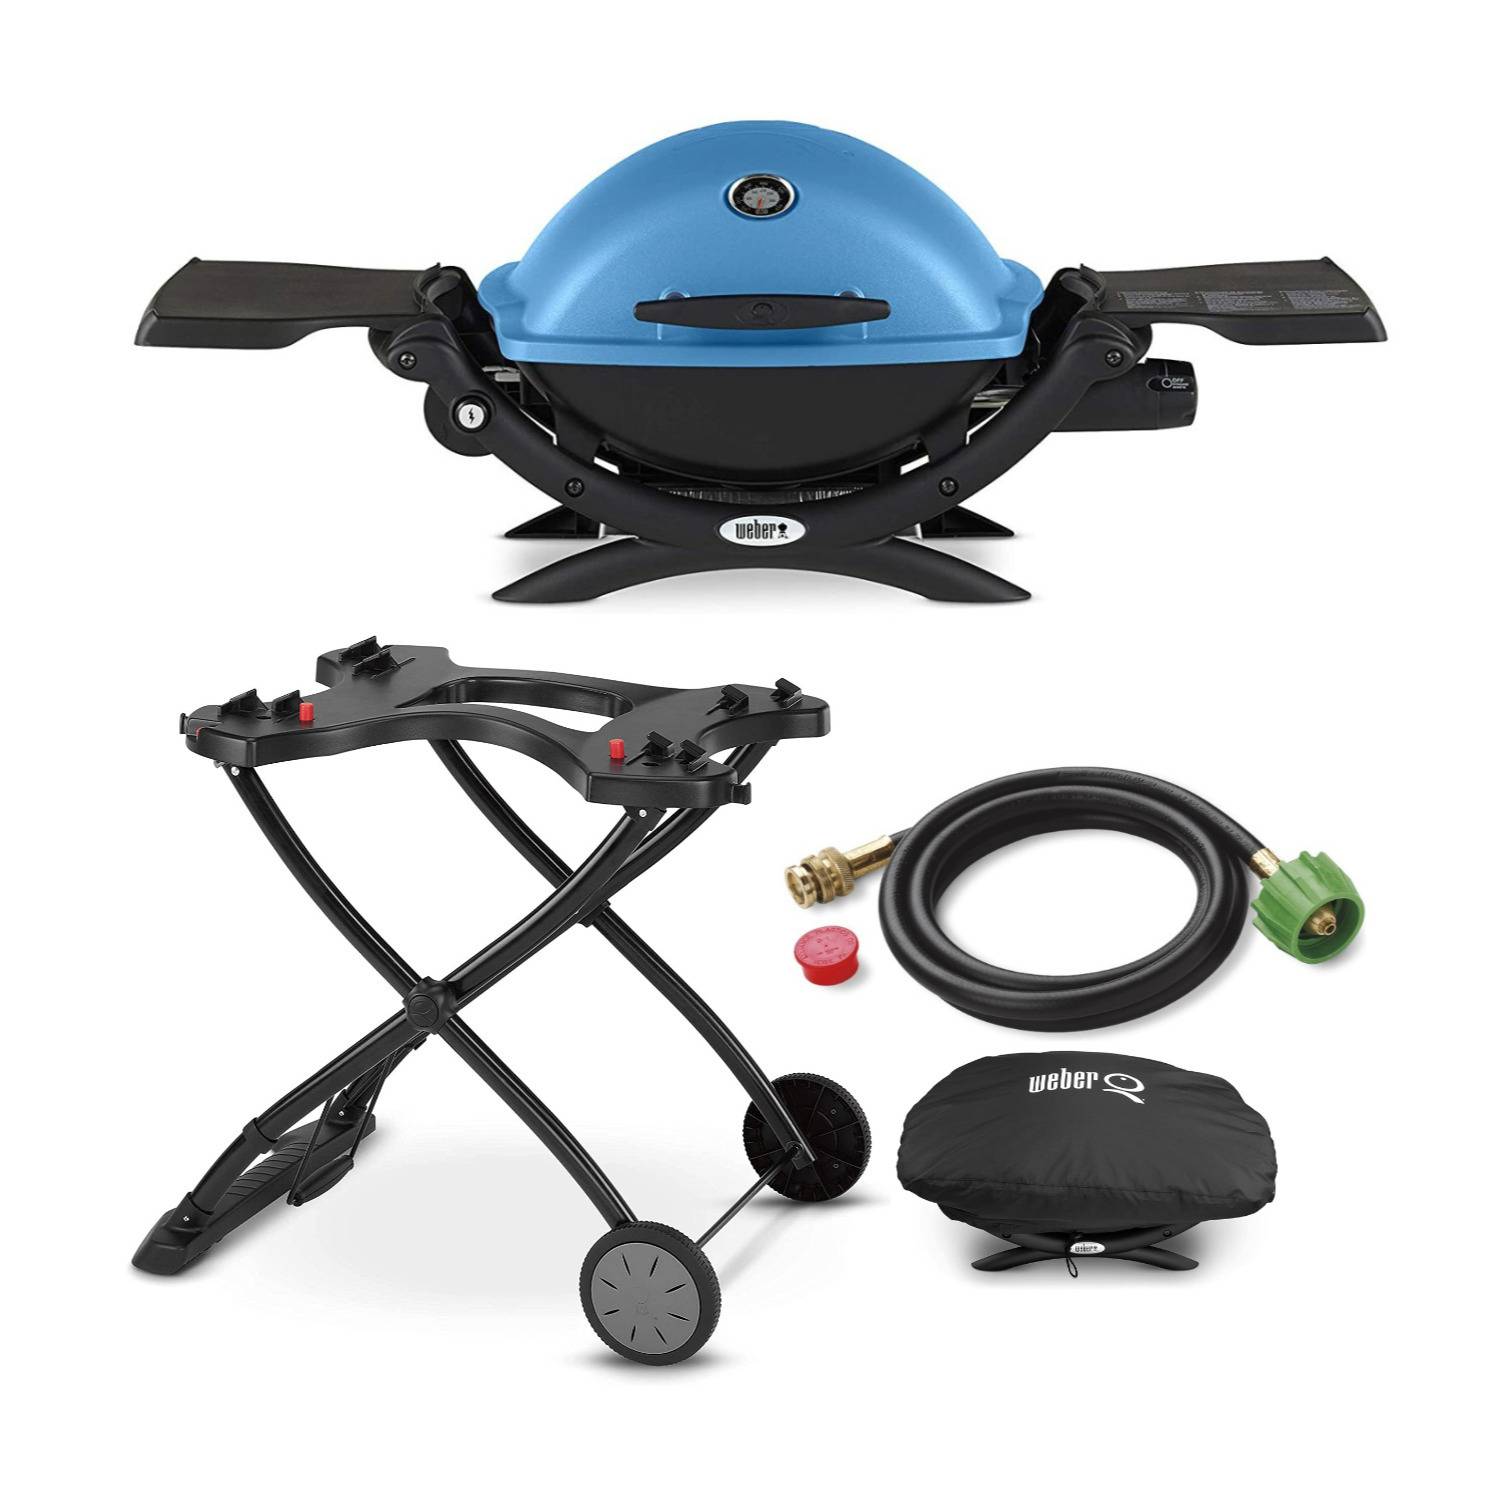 Weber Q 1200 Liquid Propane Grill (Blue) with Portable Cart, Adapter Hose and Grill Cover